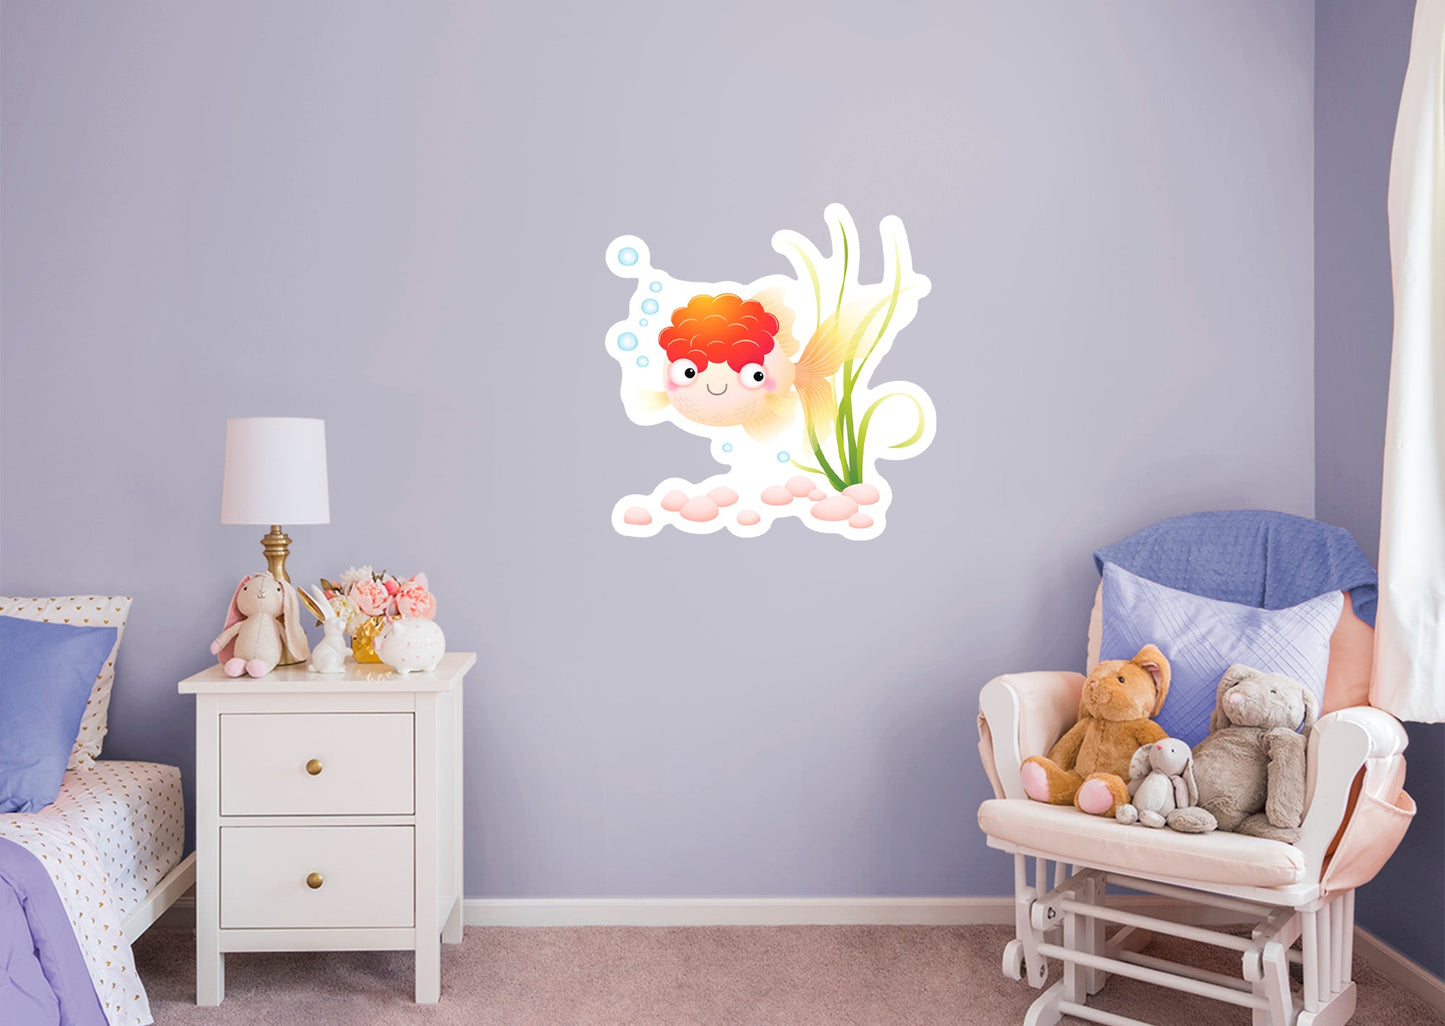 Nursery:  Pink Fish Icon        -   Removable Wall   Adhesive Decal